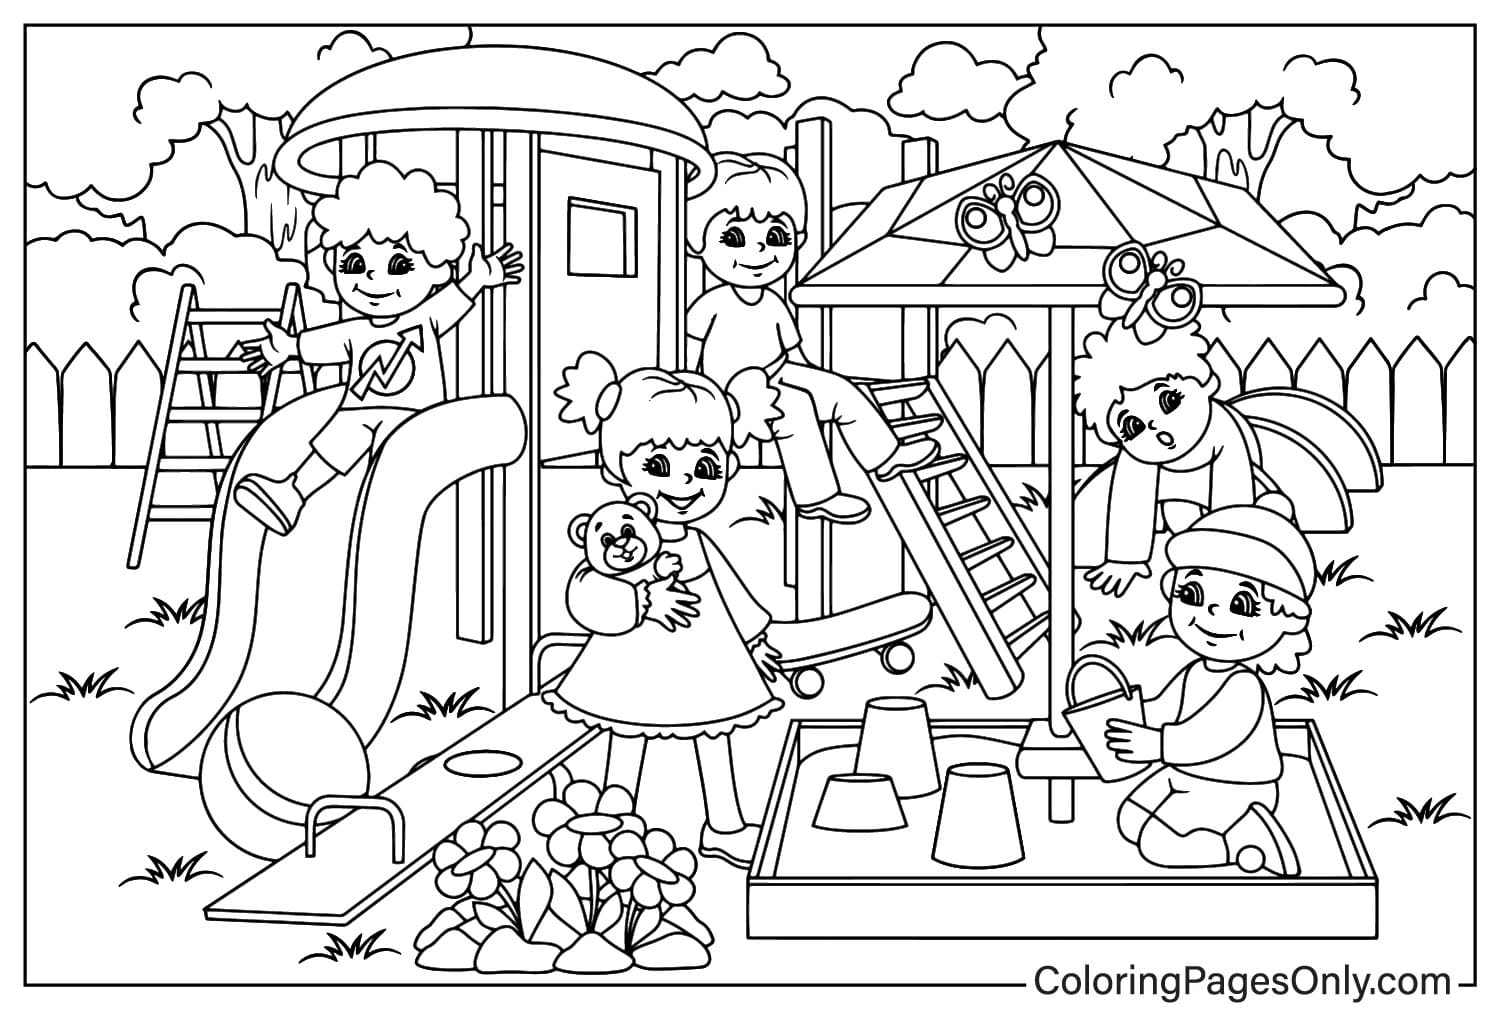 Coloring Page Playground from Playground